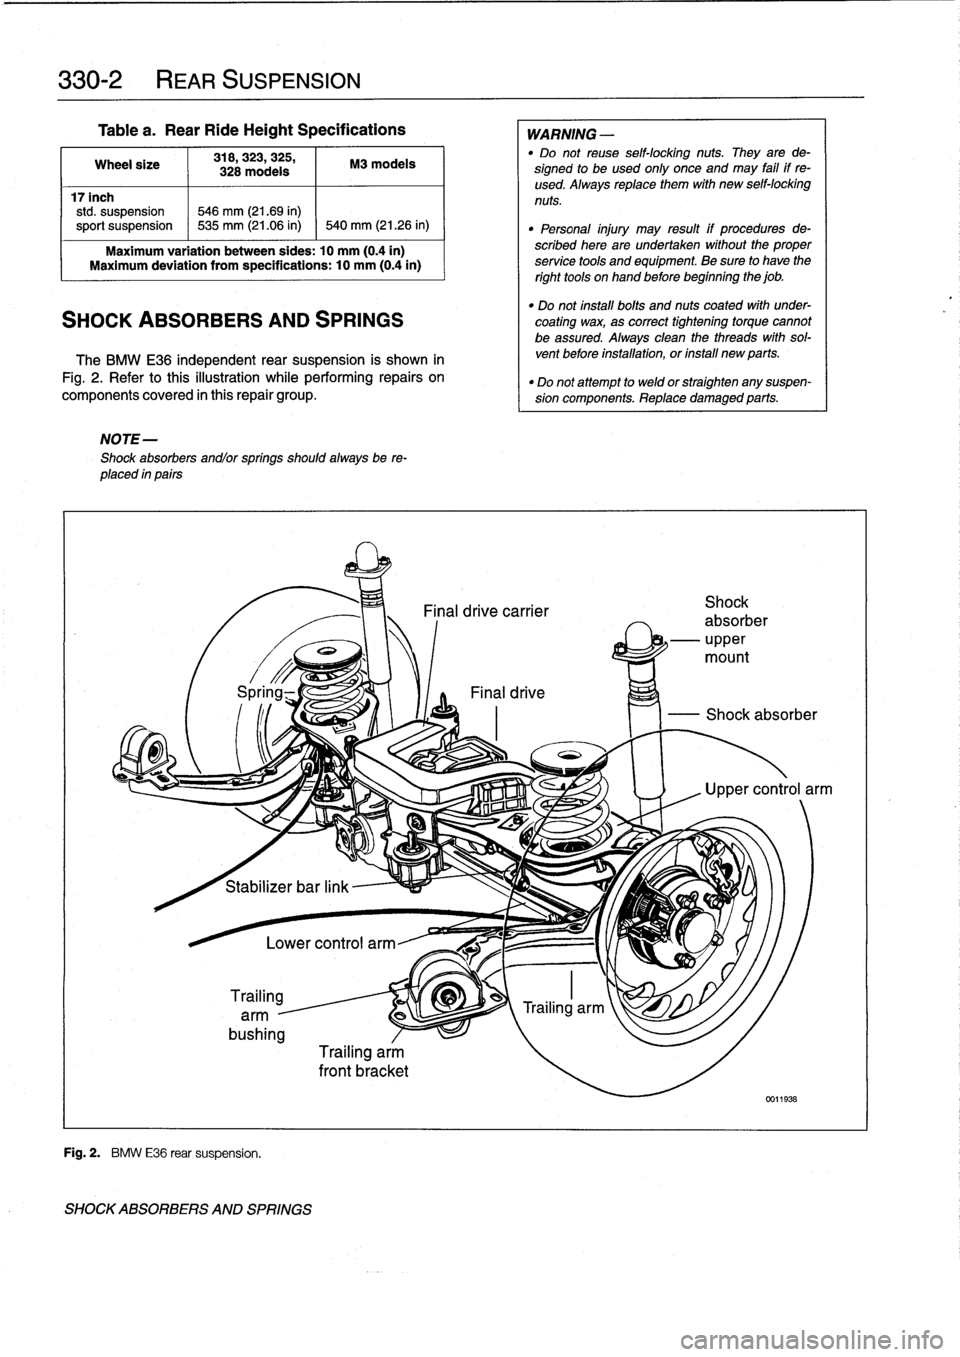 BMW 328i 1994 E36 Owners Guide 
330-2

	

REAR
SUSPENSION

Table
a
.
Rear
RideHeight
Specifications

Wheel
size

	

318,323,
325,

	

M3
modeis
328
modeis

17inch
std
.
suspension

	

546
mm
(21.69
in)
sport
suspension

	

~
535
mm